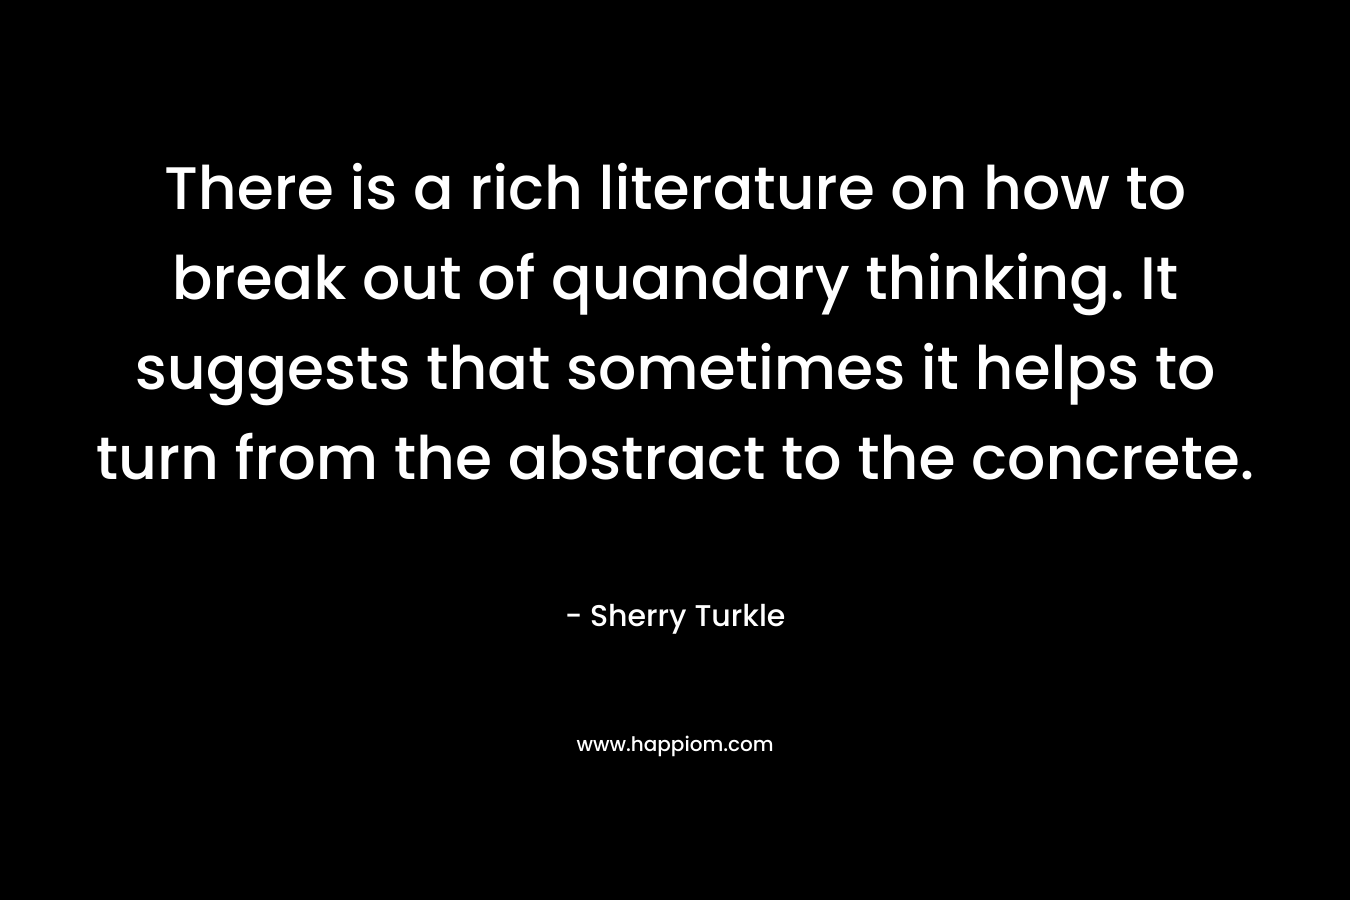 There is a rich literature on how to break out of quandary thinking. It suggests that sometimes it helps to turn from the abstract to the concrete. – Sherry Turkle